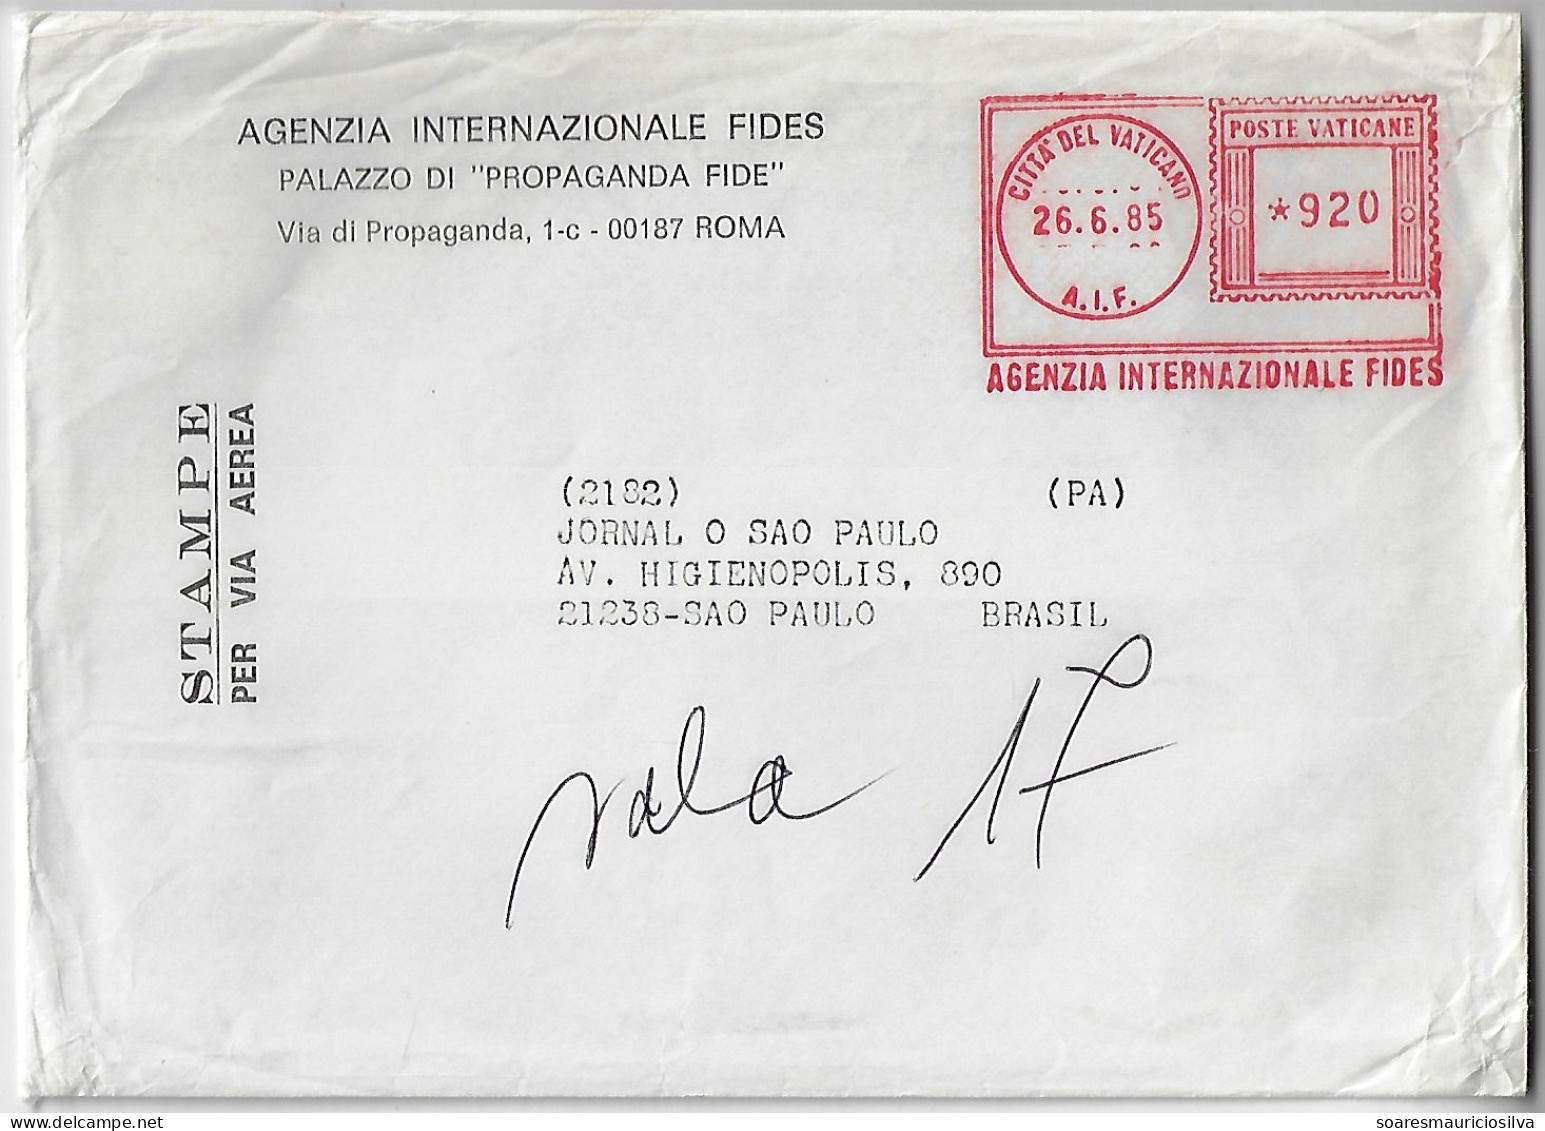 Vatican 1985 Cover Sent To Brazil With Meter Stamp Lirma Slogan Agenzia Internazionale Fides International Faith Agency - Covers & Documents